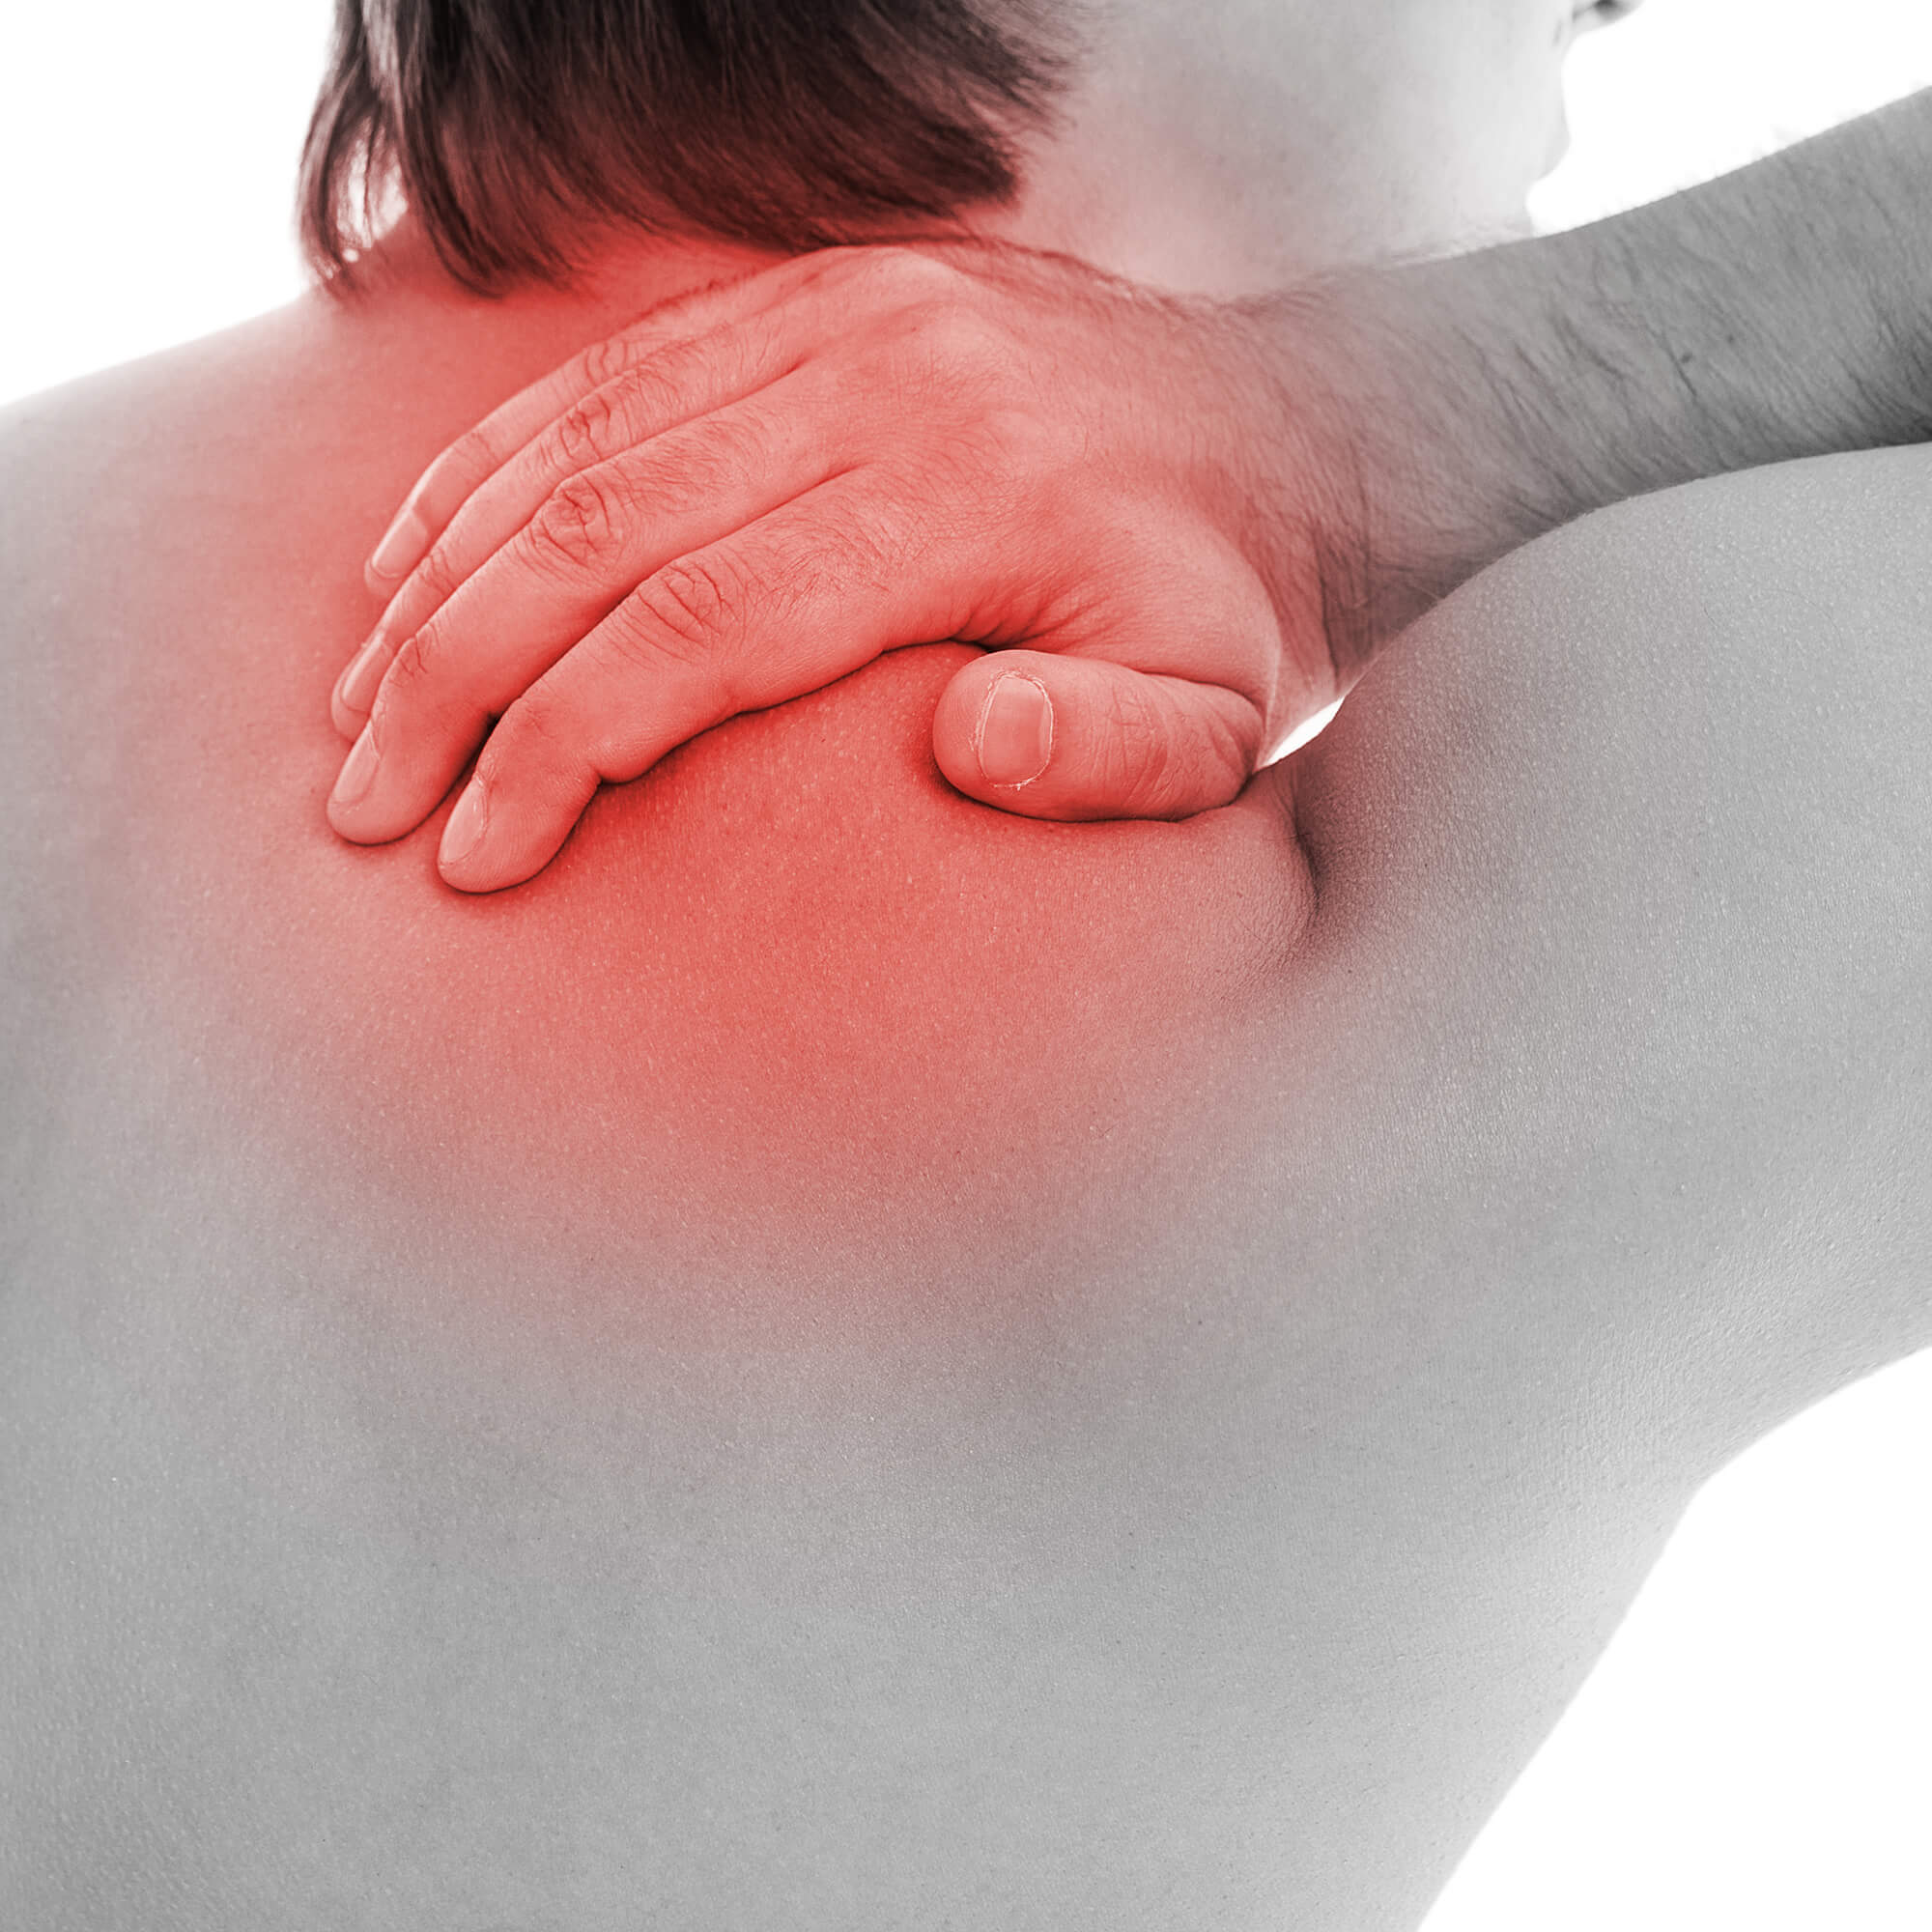 Acute vs. Chronic Rotator Cuff Tear: What's the Difference?